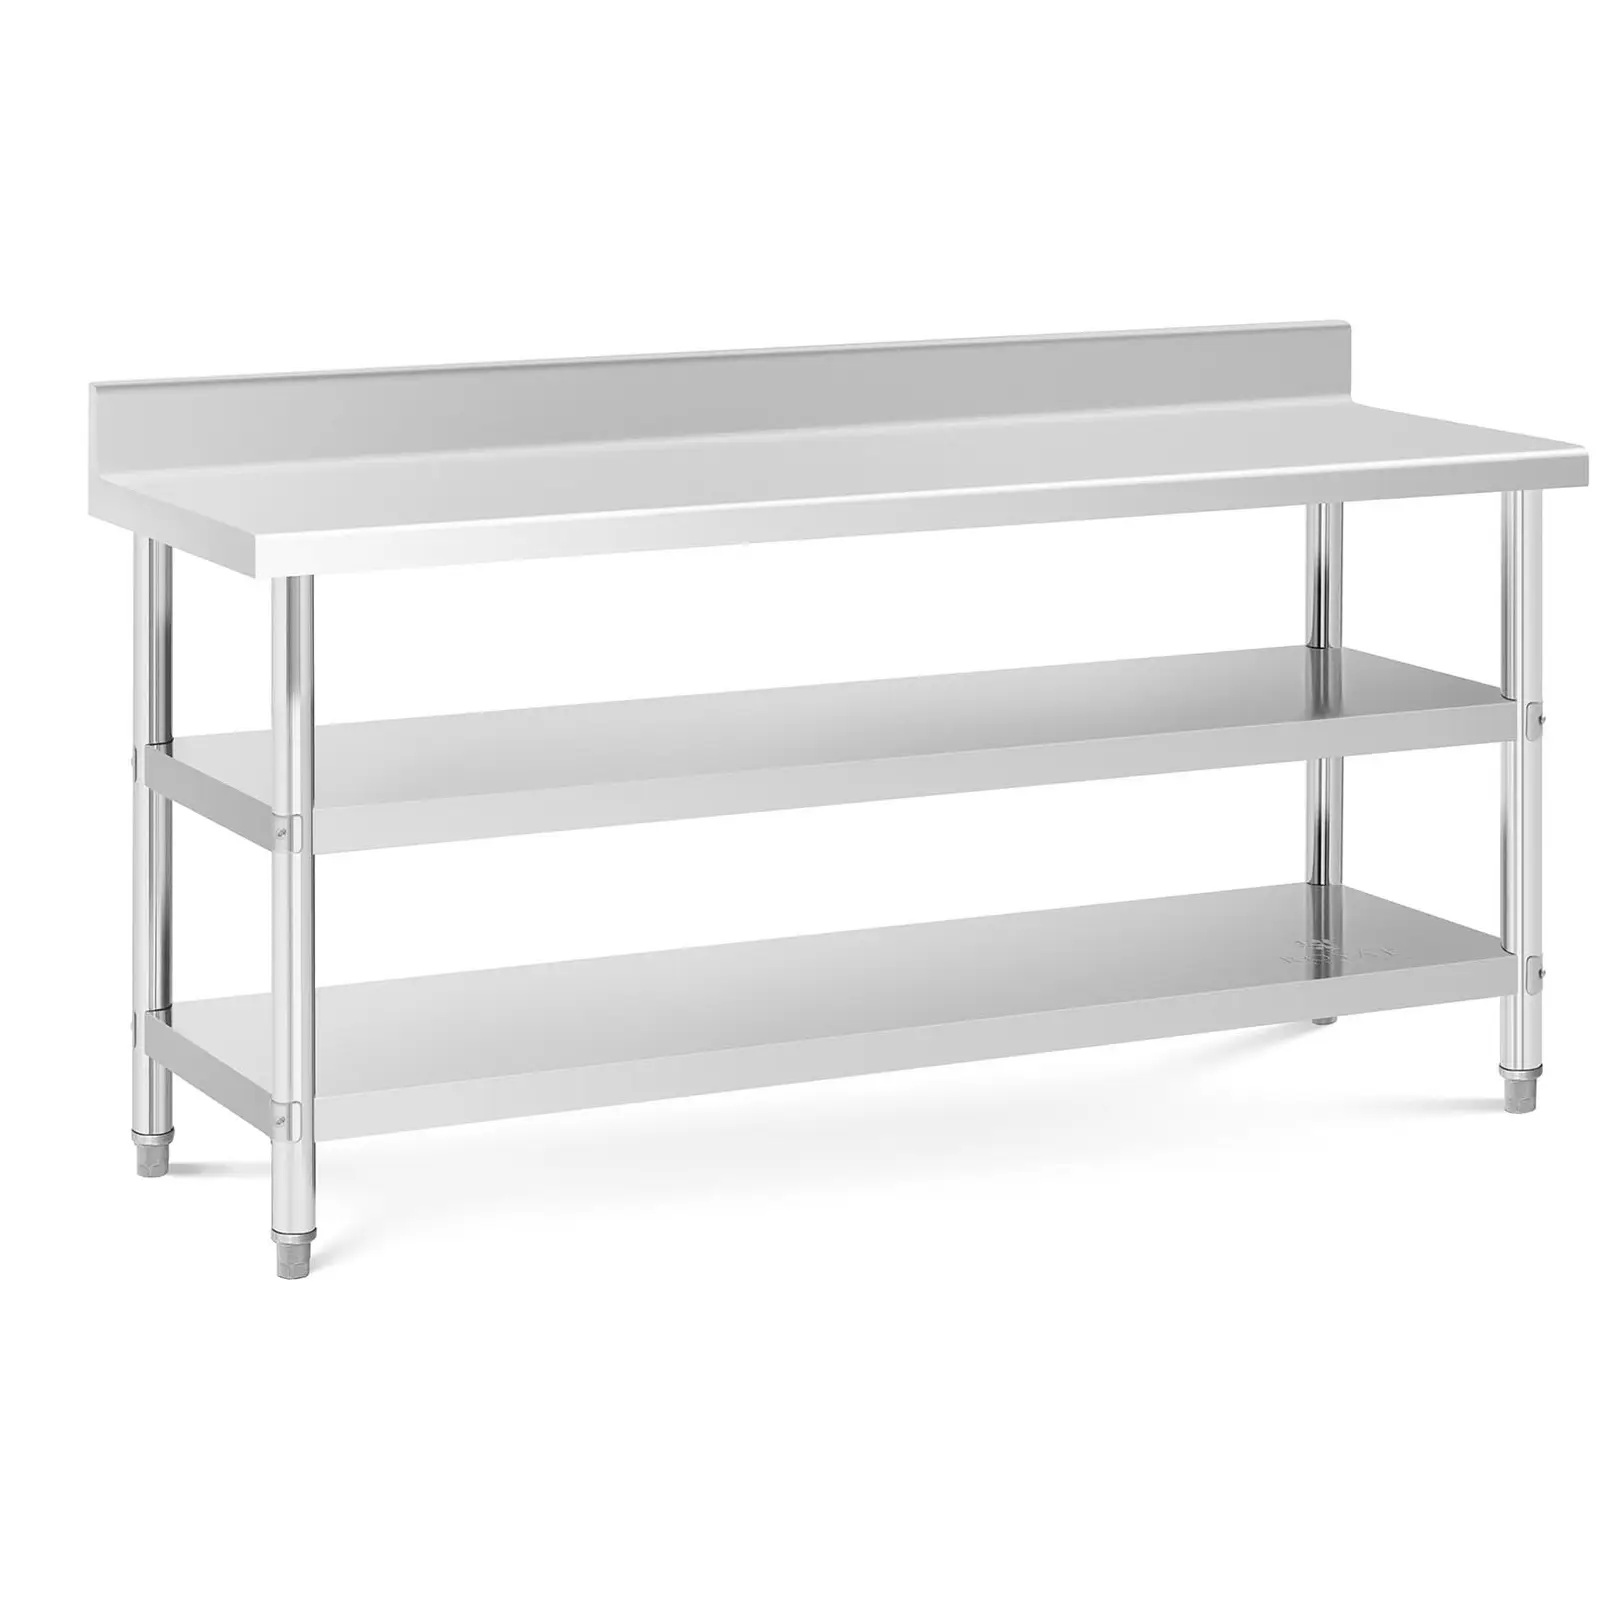 Stainless Steel Work Table with upstand - 180 x 60 x 16.5 cm - 226 kg - 2 shelves - Royal Catering